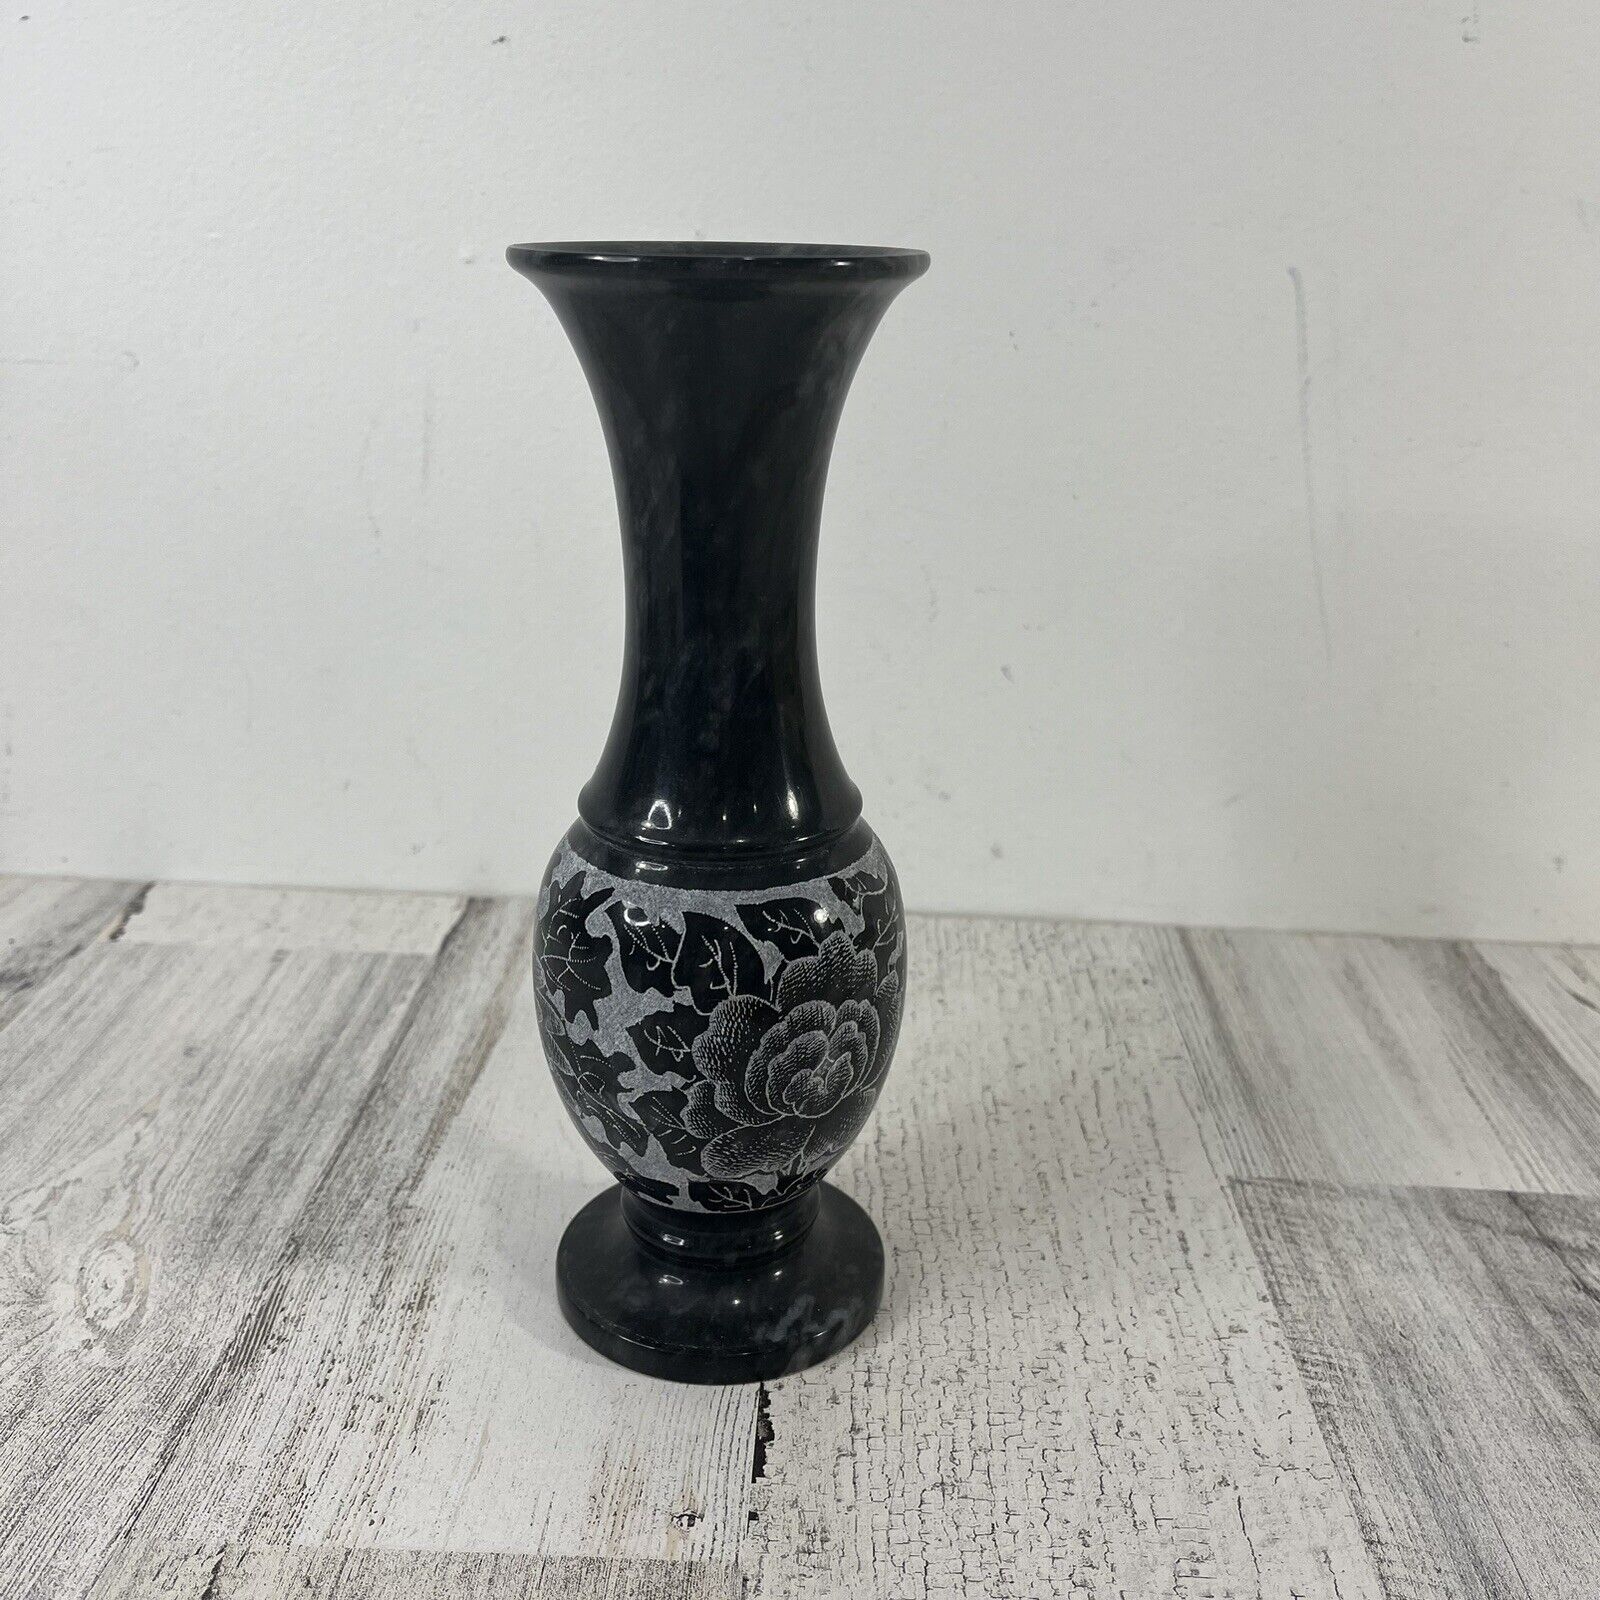 Etched Grey Swirl Genuine Marble Vase, 8” Tall. Very Good Condition.